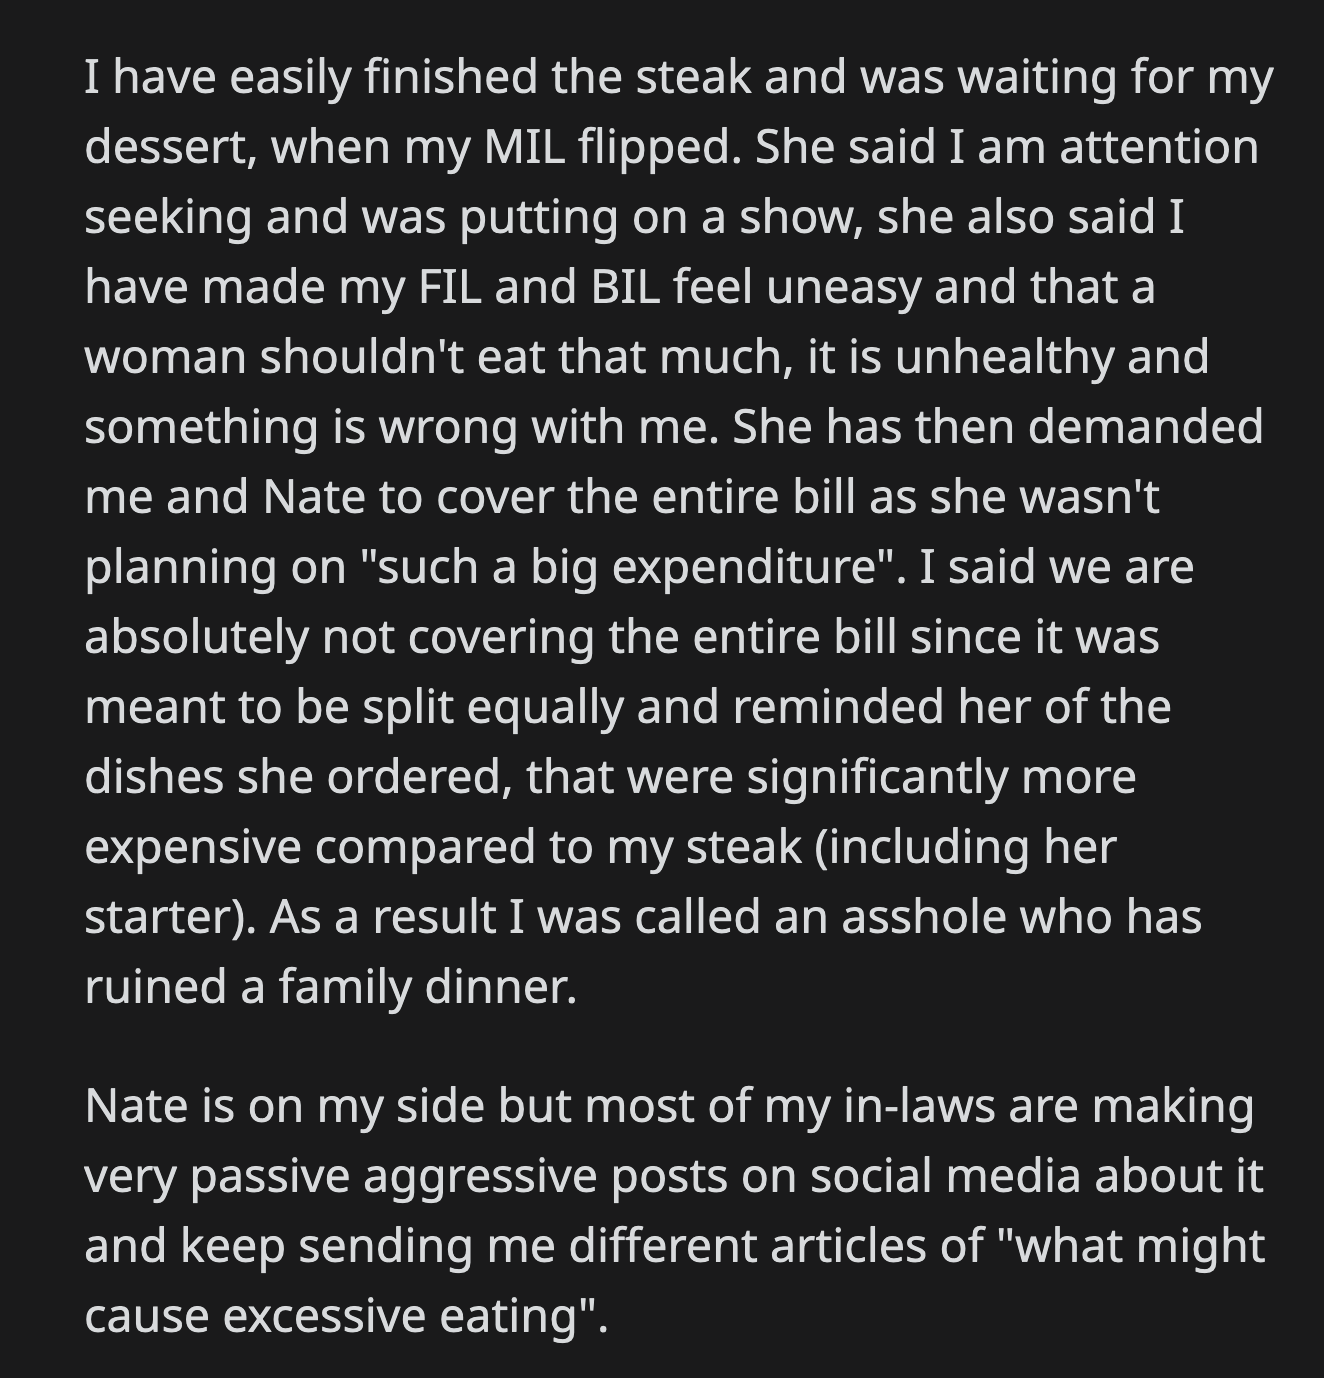 OP refused when her MIL demanded that OP and her husband cover the bill. OP reminded her MIL of her expensive orders which cost more than her steak. Her husband is on her side, but his family has been sending OP articles about excessive eating.